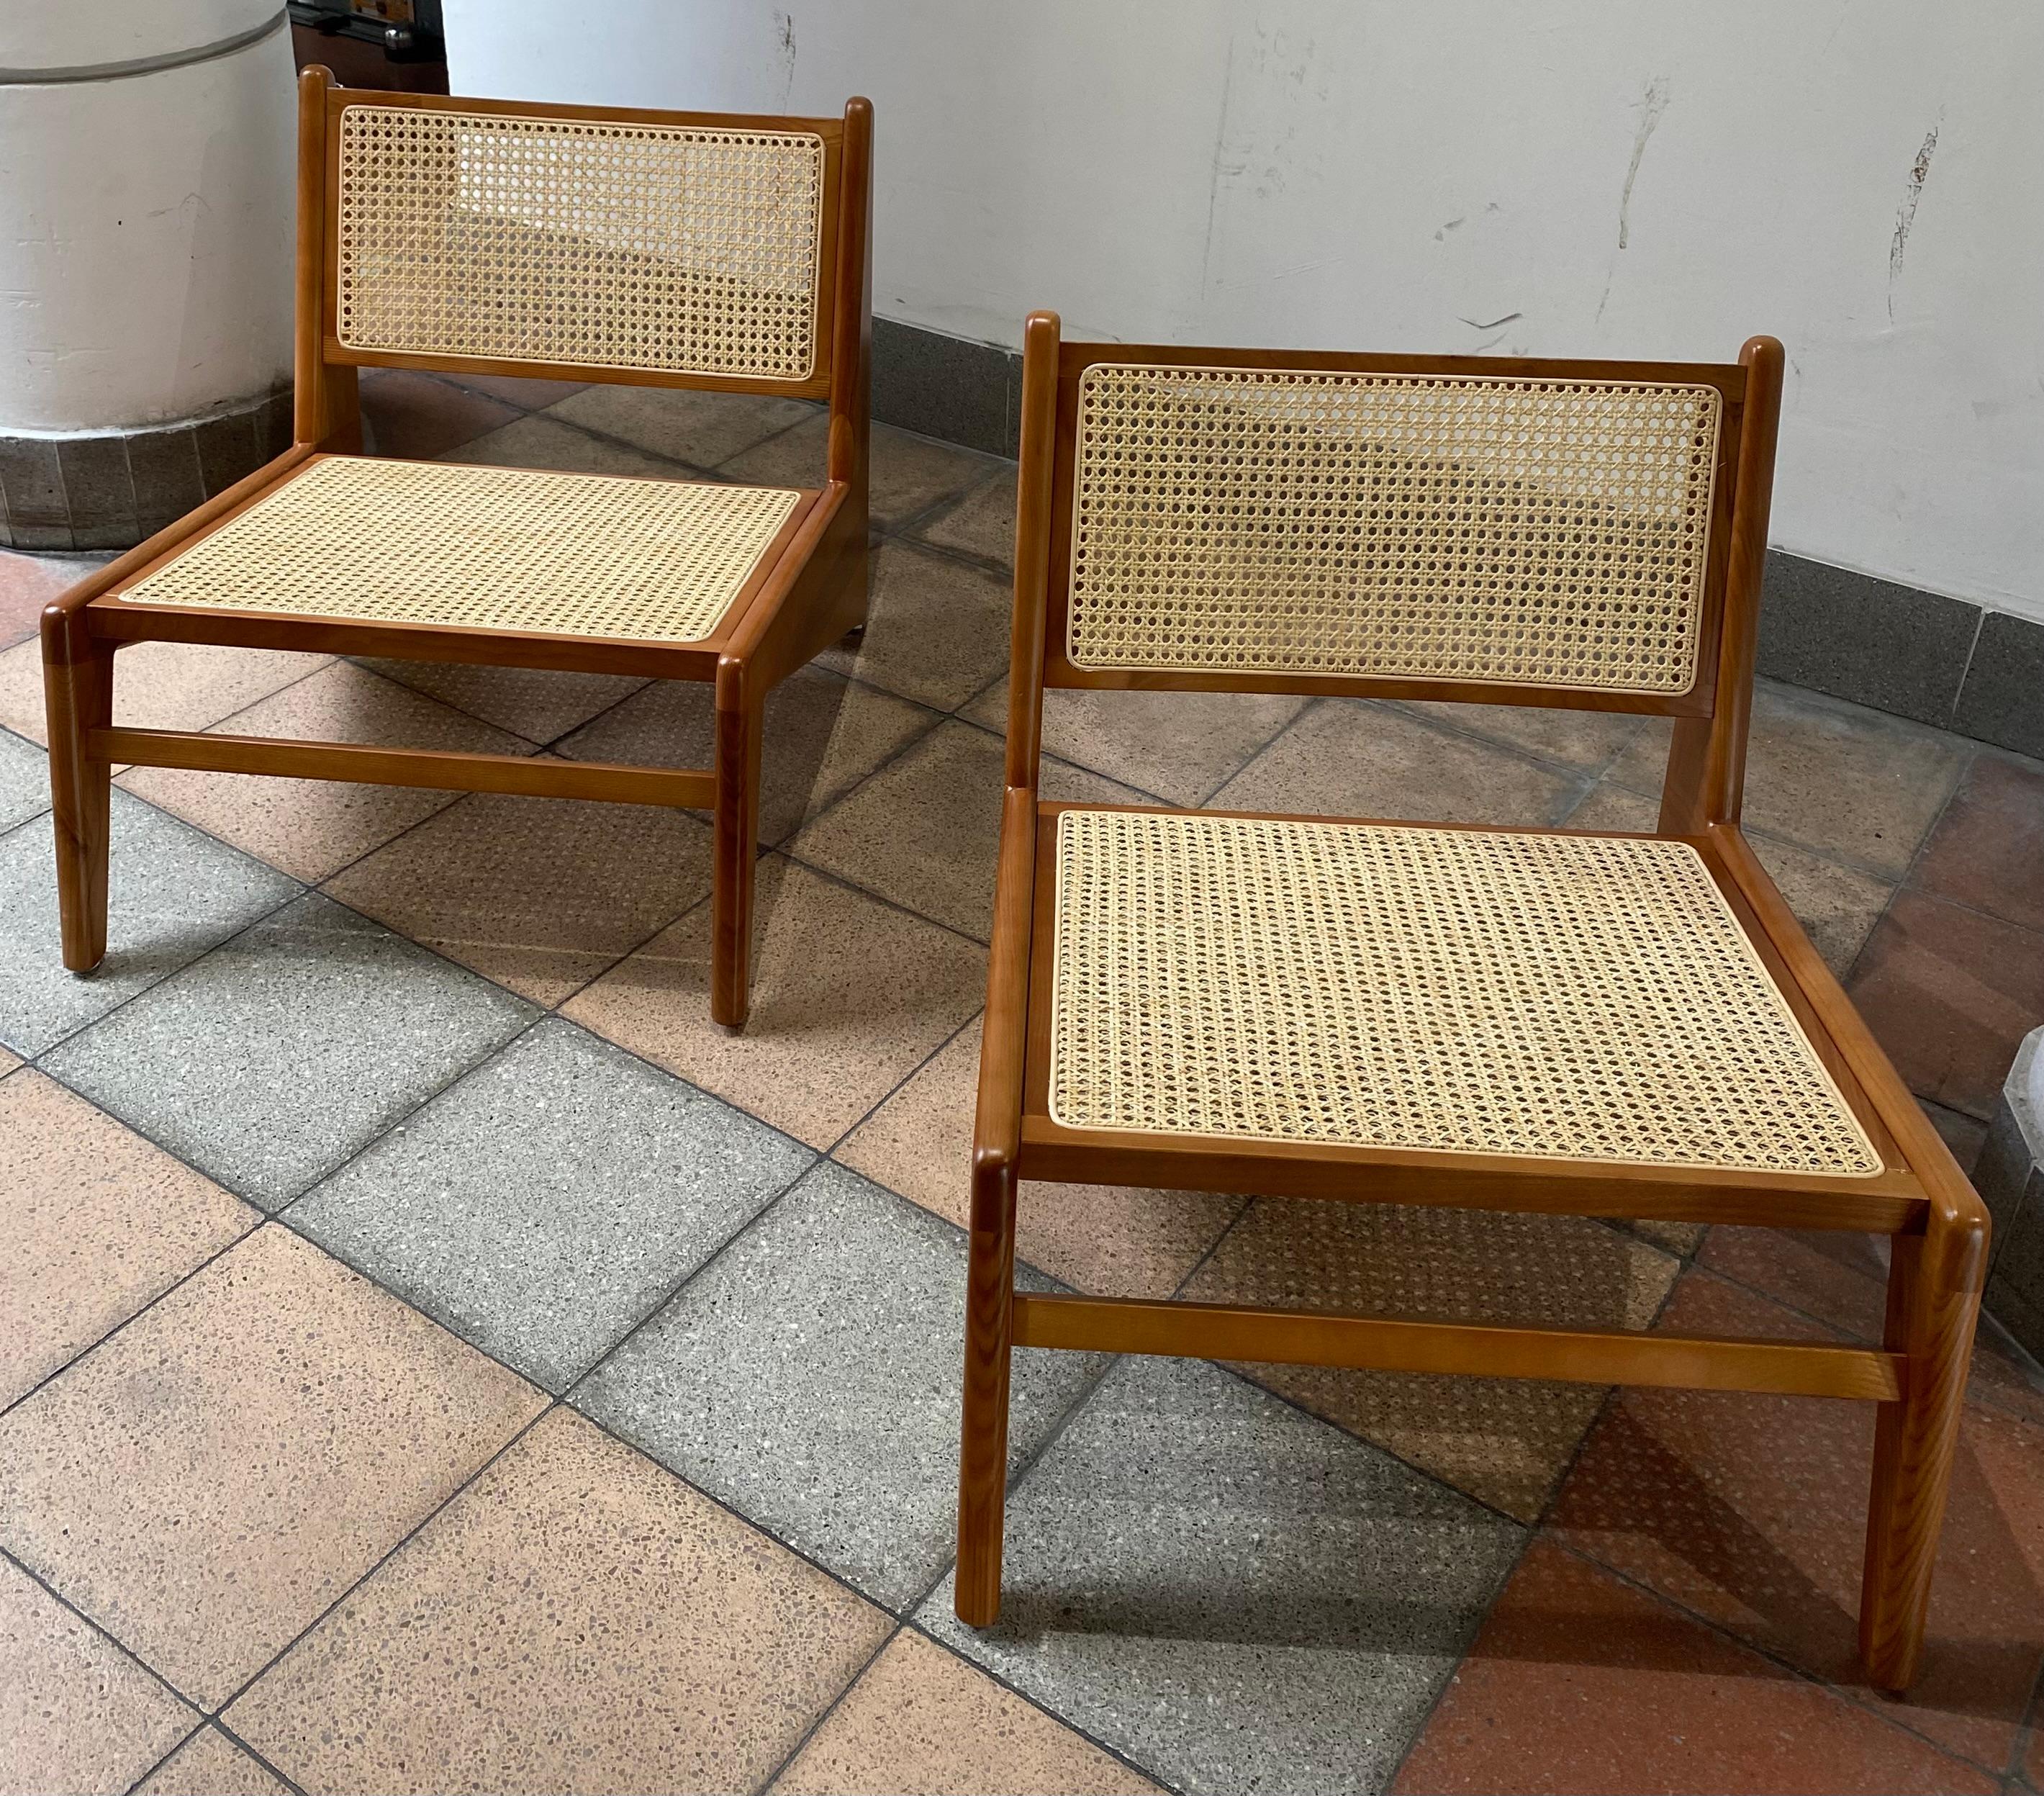 Pair of armchairs in the style of P. Jeanneret 
Design 1950
Rattan - teak - cane 
Dimensions : H 61 cm x W 61 cm x d 71 cm
Ref : circa 1938/10
